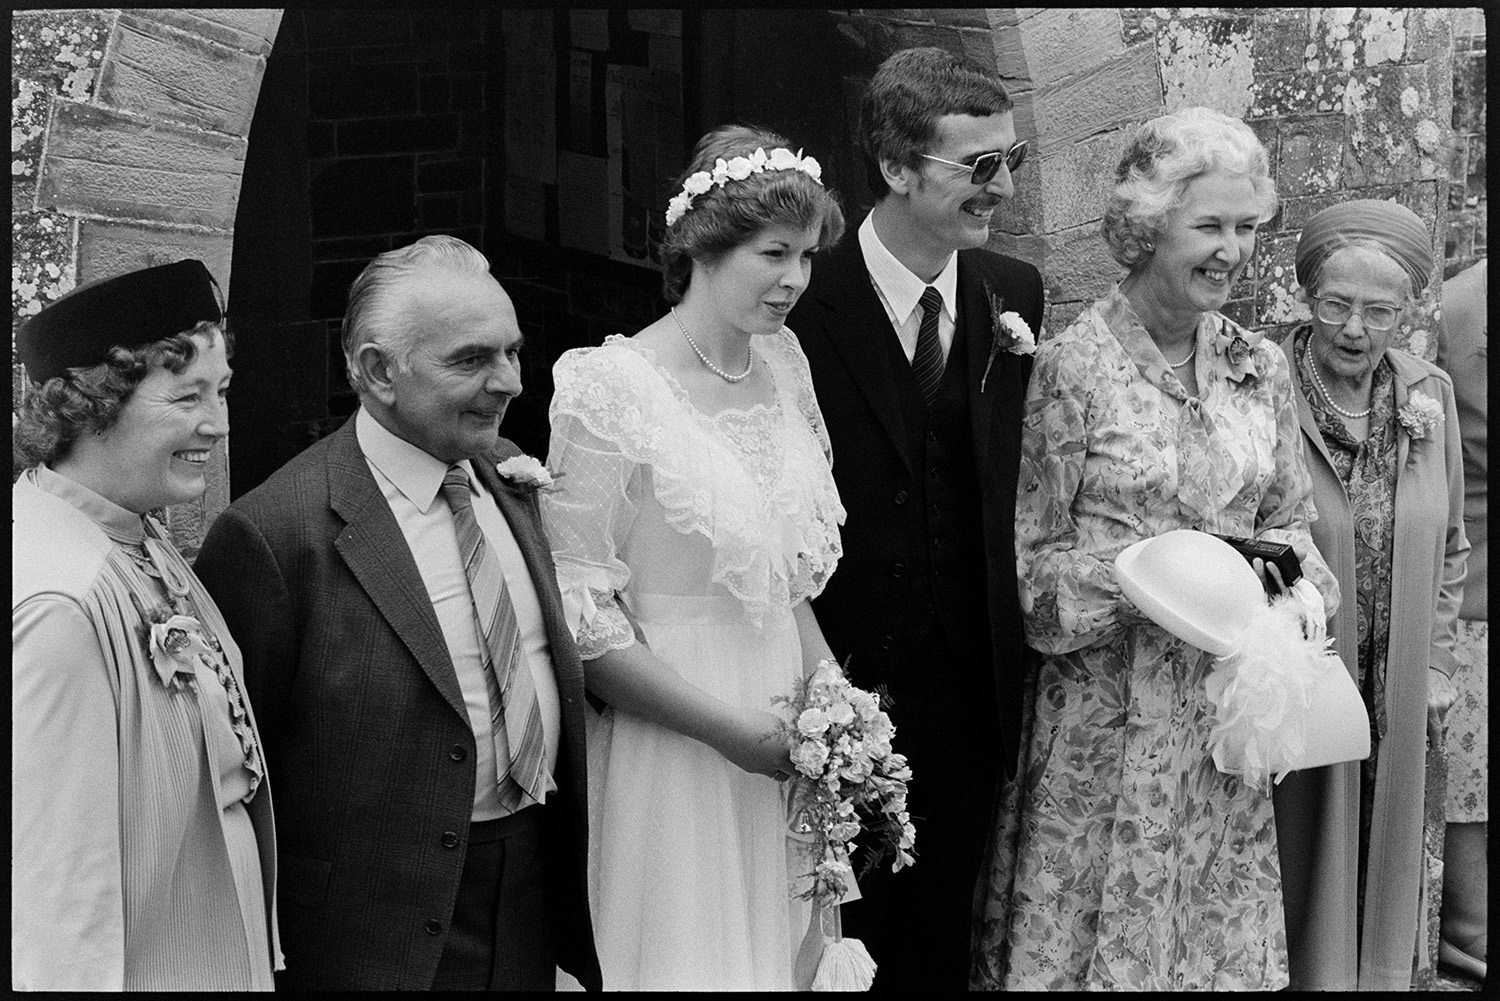 Wedding, groups, bride and groom leaving church, chatting to guests. 
[Cynthia Palmer, her groom and other wedding guests posing for a photograph outside the entrance to Dolton church after their wedding.]